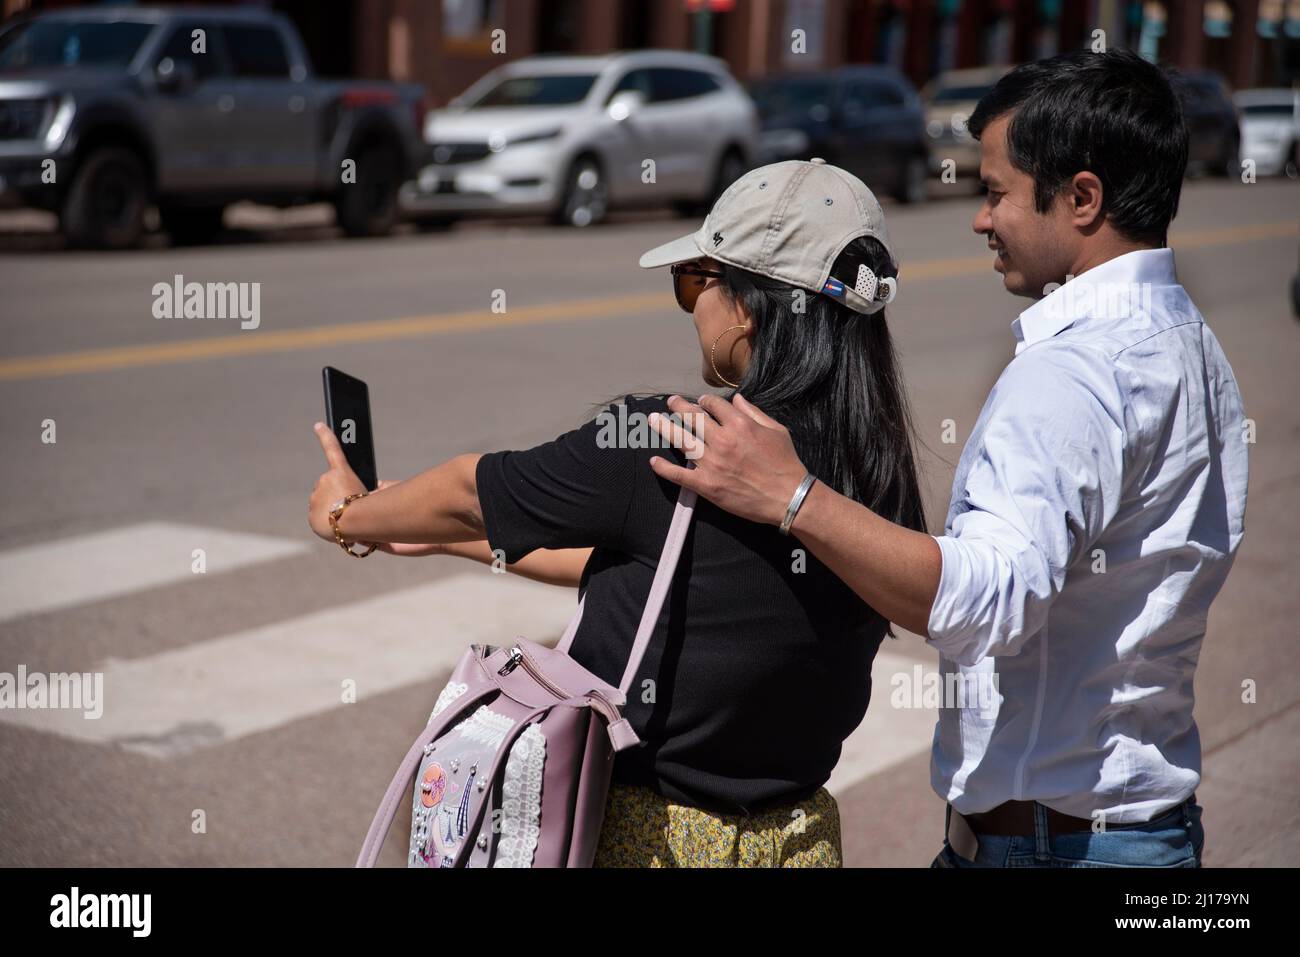 A couple visiting Santa Fe, New Mexico, take a souvenir selfie portrait with their smartphone. Stock Photo